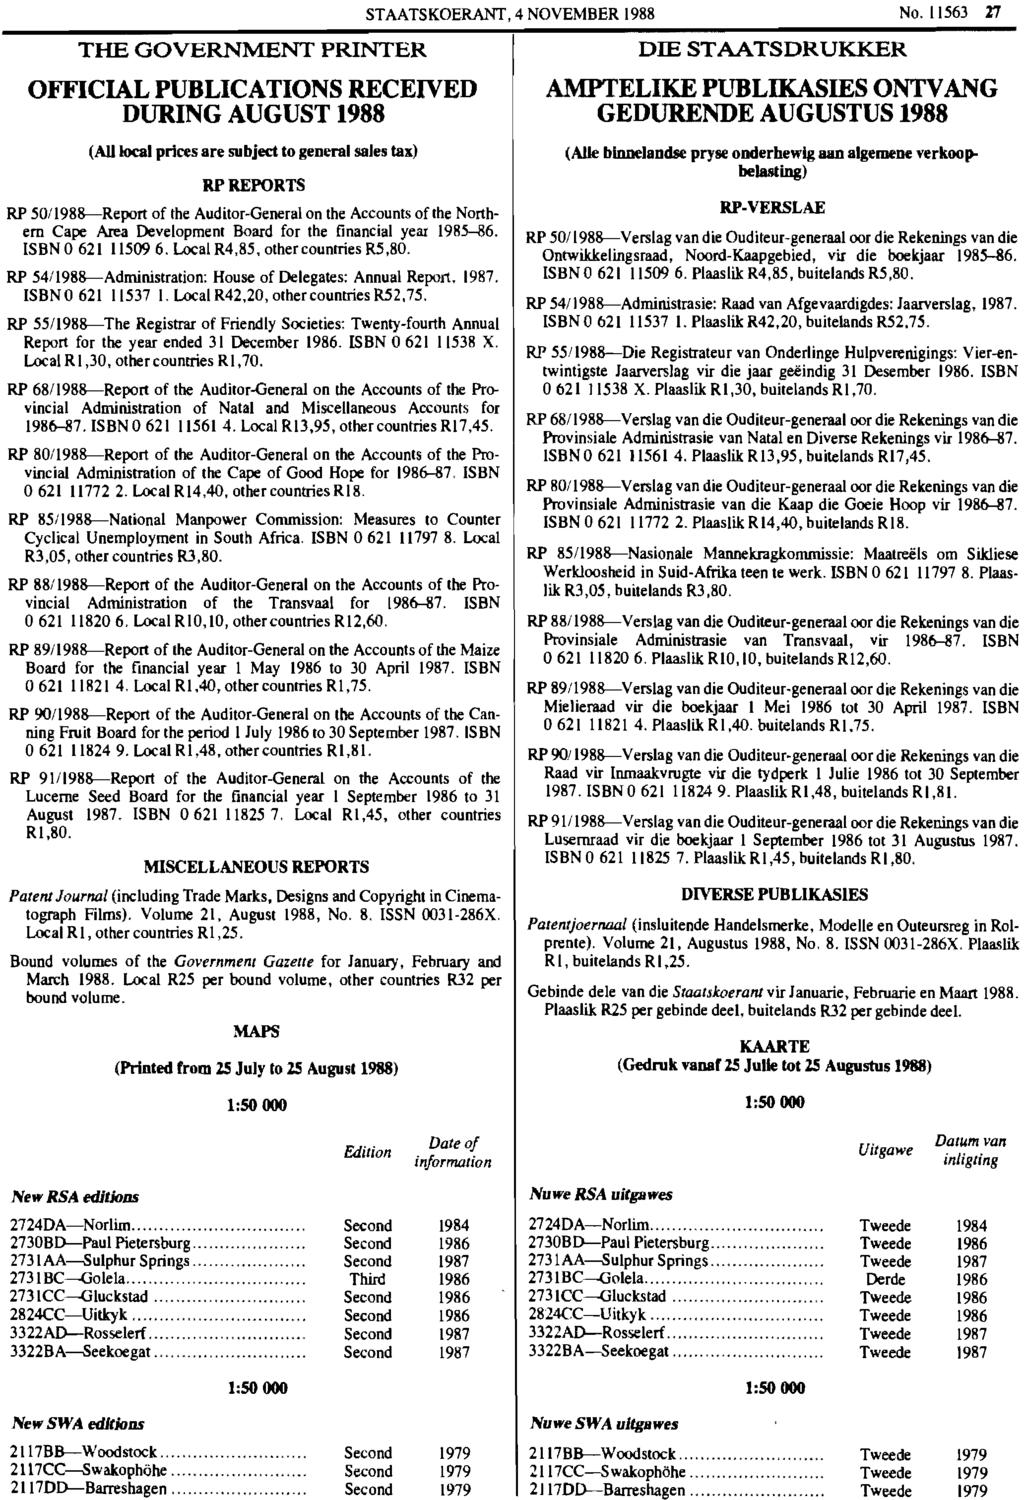 THE GOVERNMENT PRINTER OFFICIAL PUBLICATIONS RECEIVED DURING AUGUST 1988 (AUIoc:aI prices are subject to general sales tax) RPREPORTS RP 50/1988-Report of the Auditor-General on the Accounts of the